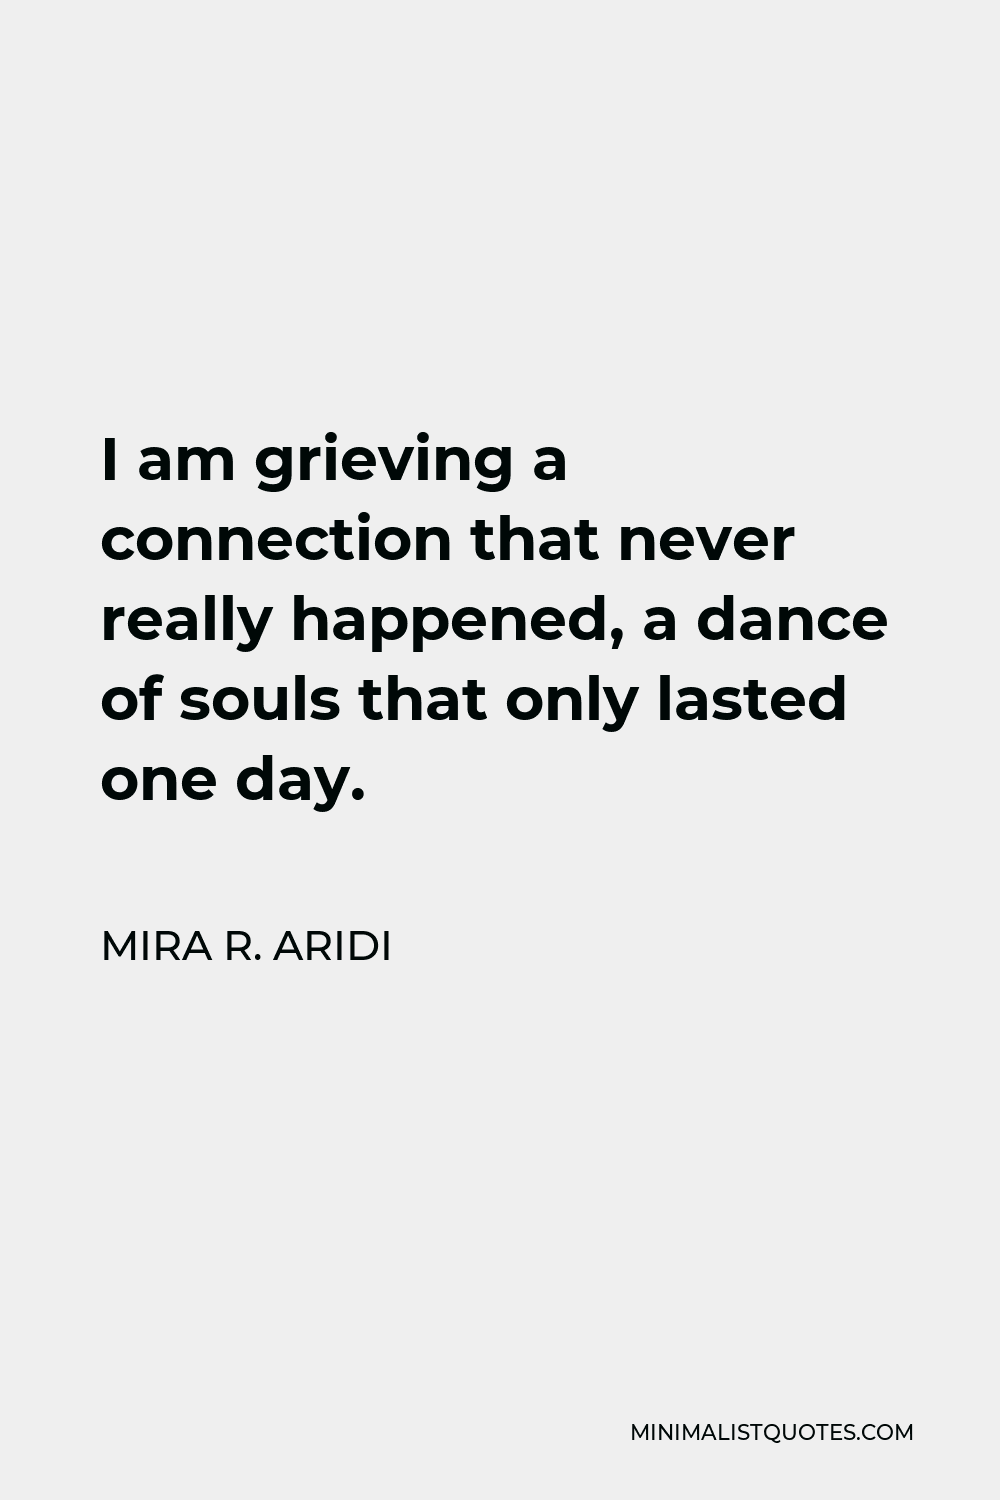 Mira R. Aridi Quote - I am grieving a connection that never really happened, a dance of souls that only lasted one day.